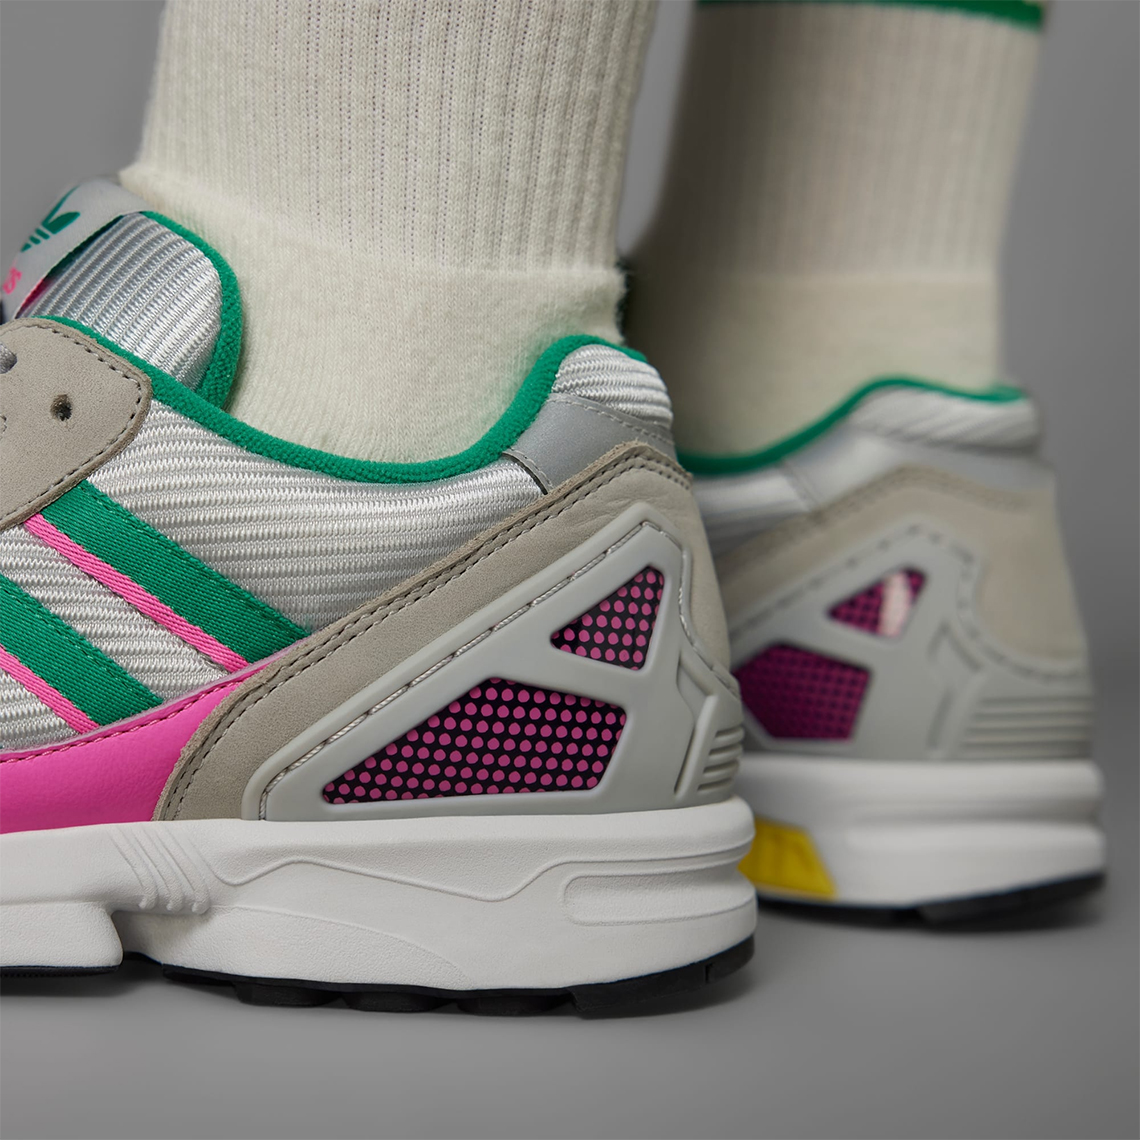 Adidas Zx8000 Grey Two Court Green Screaming Pink Ig3076 5